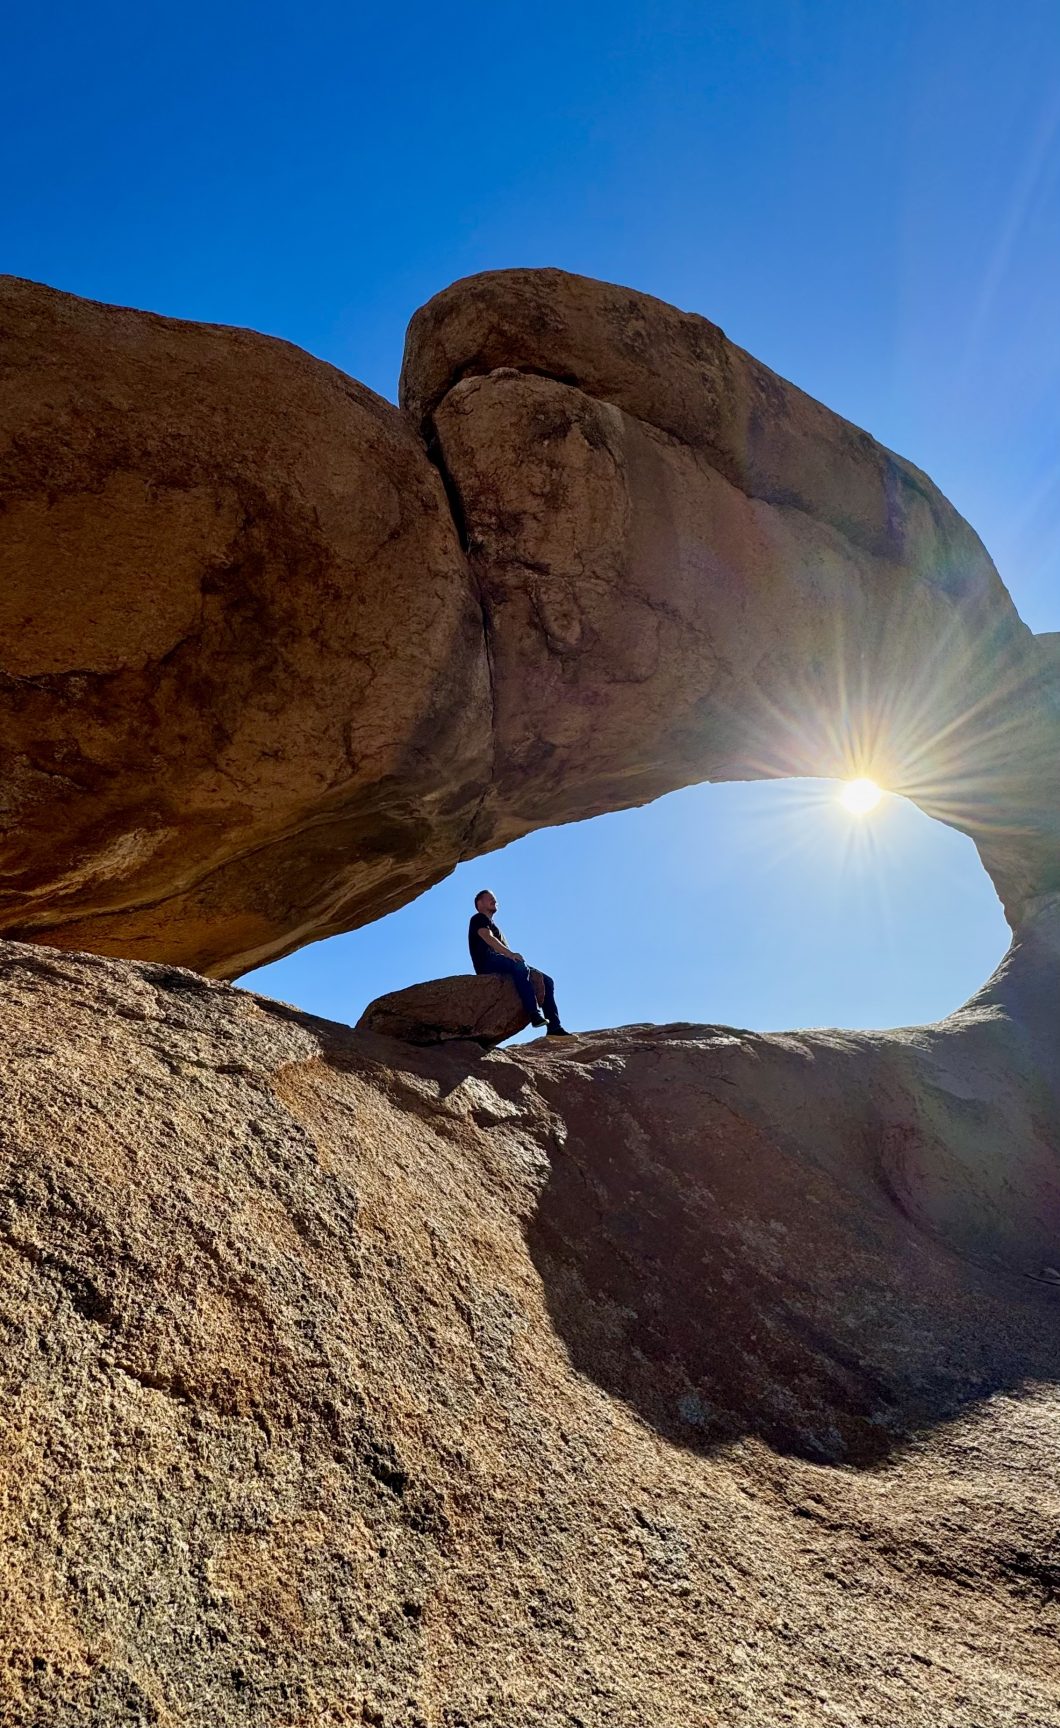 Me at Spitzkoppe